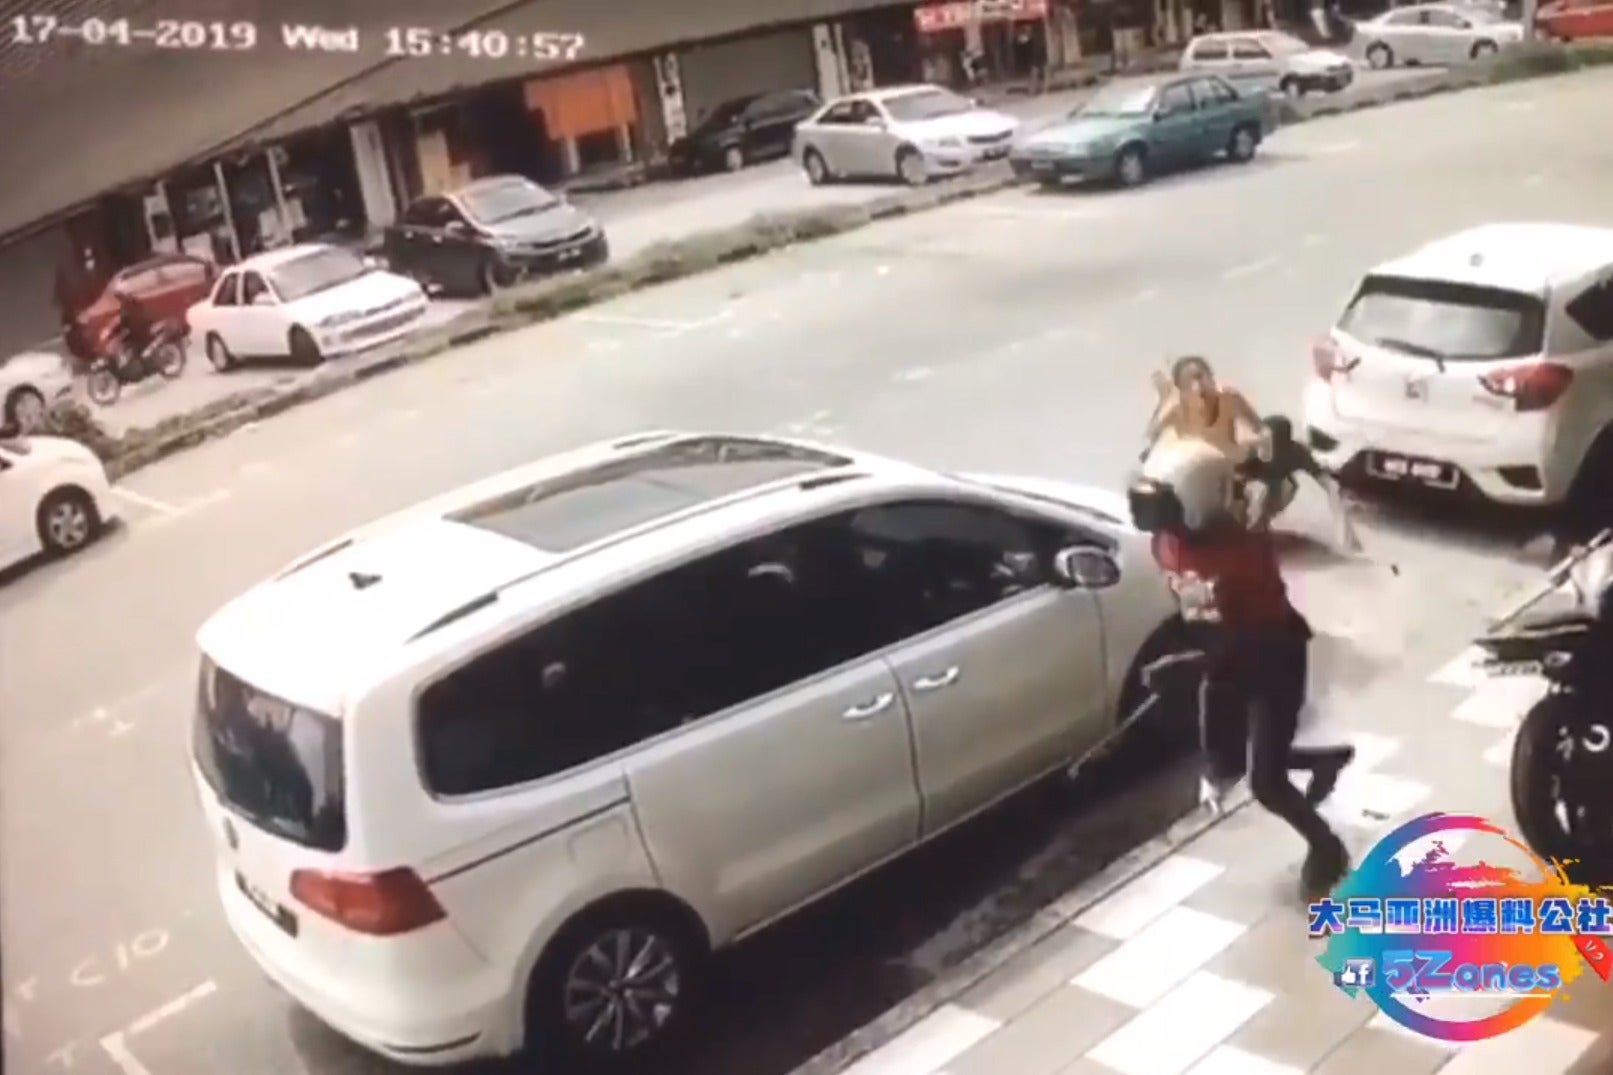 M'sian Man Attacked by Stranger Wielding Parang, Barely Escapes Thanks to Brave Wife Who Protected Him - WORLD OF BUZZ 2